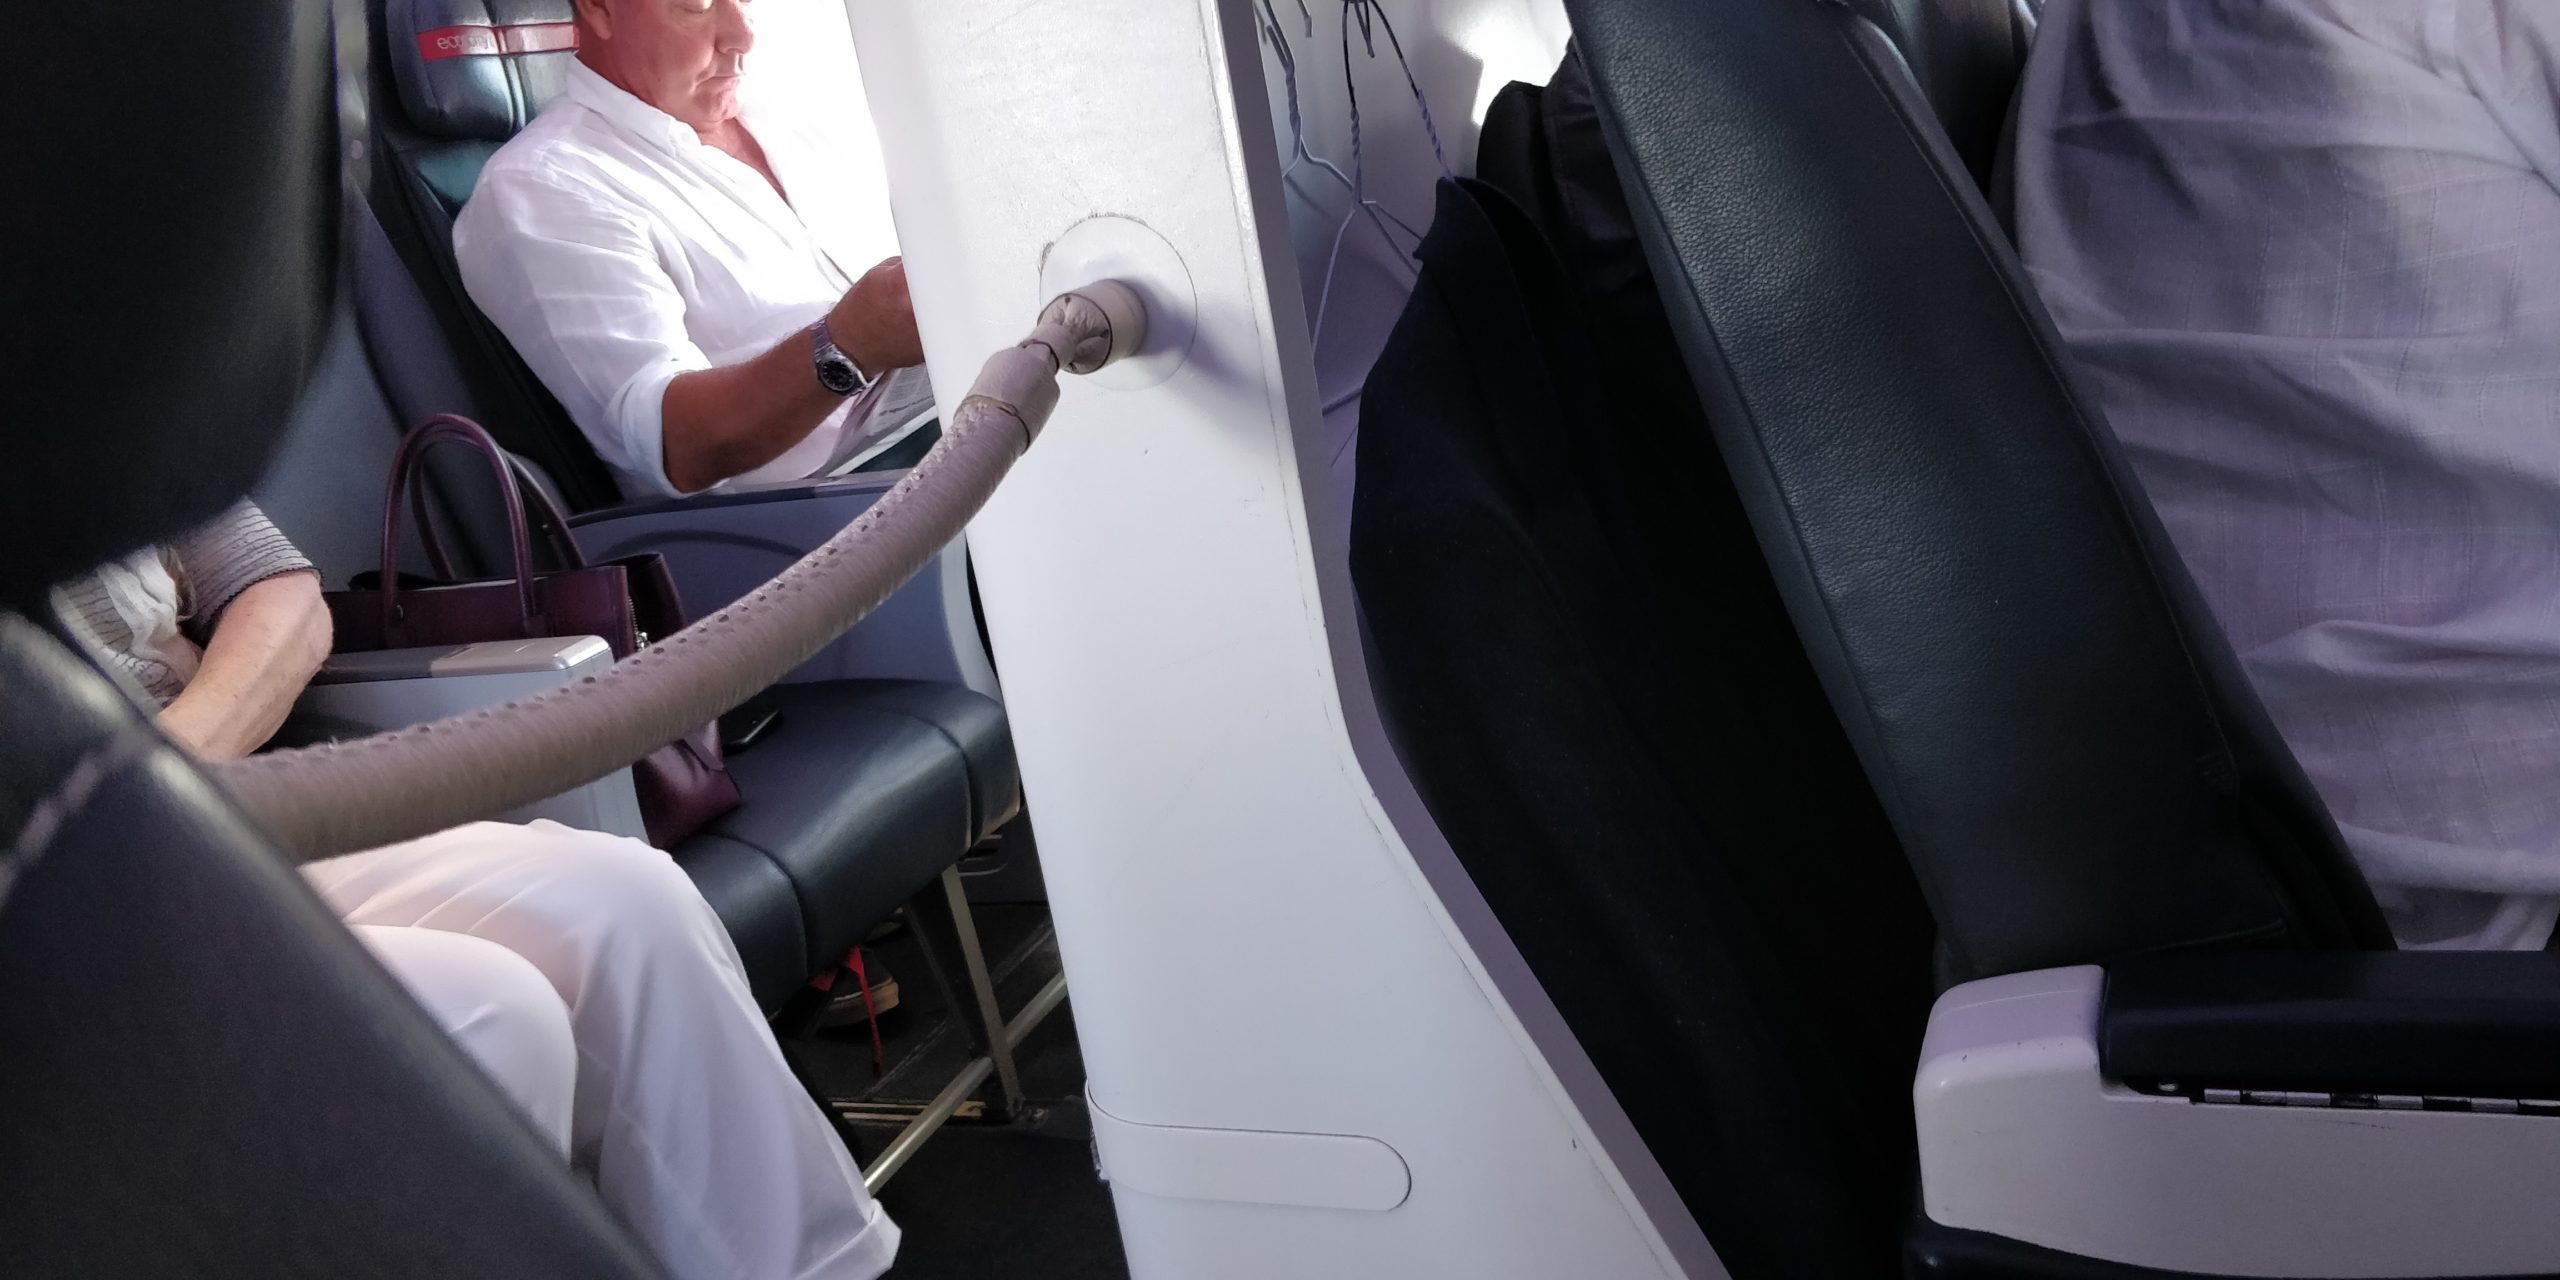 picture of the barrier rope separating business class from economy